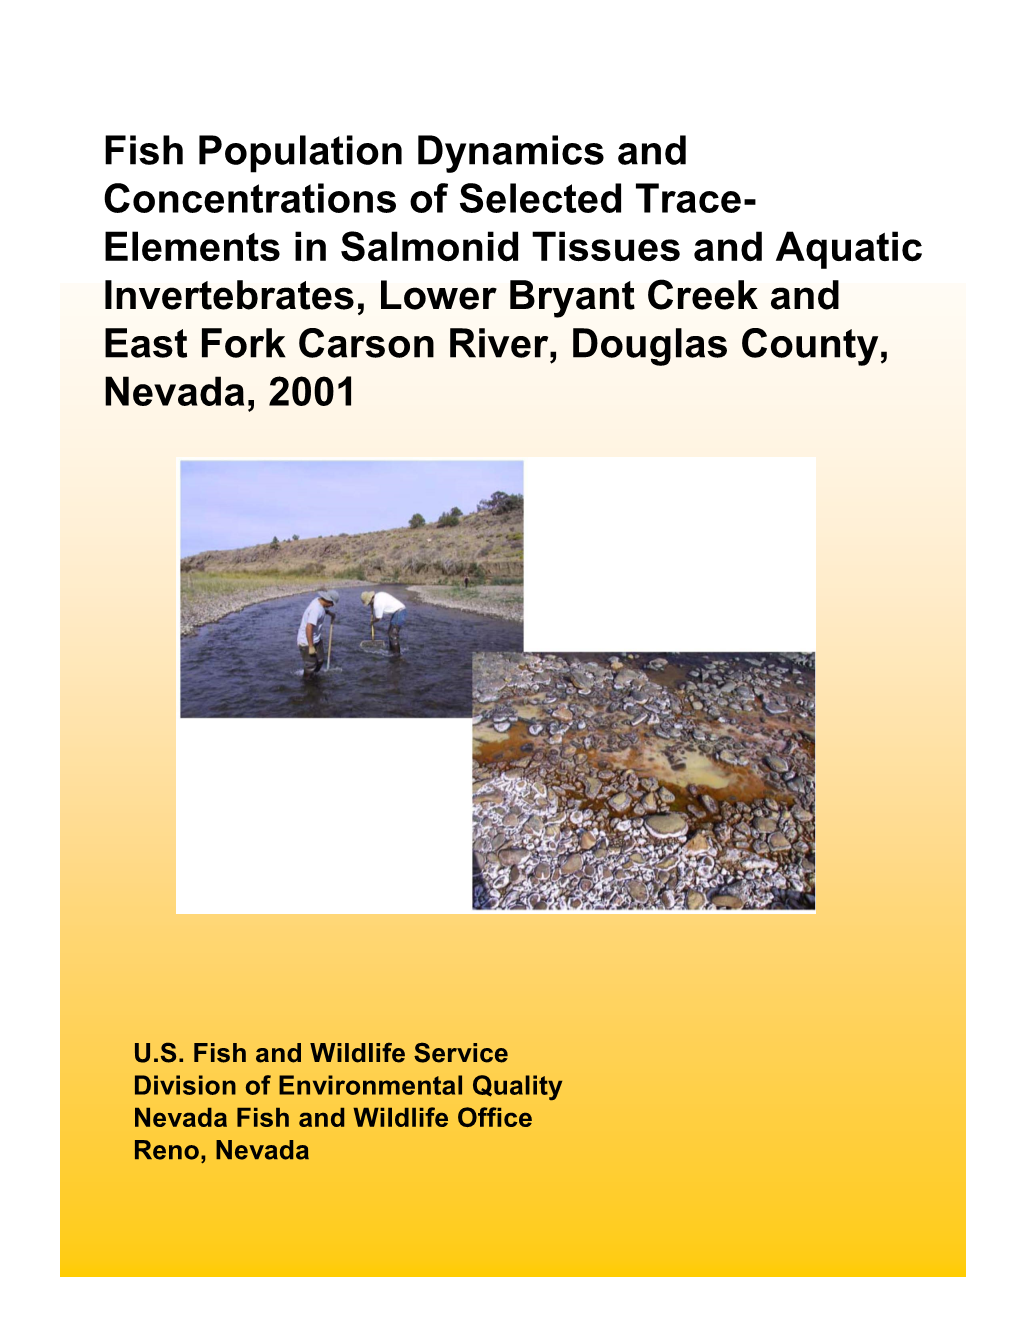 Fish Population Dynamics and Concentrations of Selected Trace